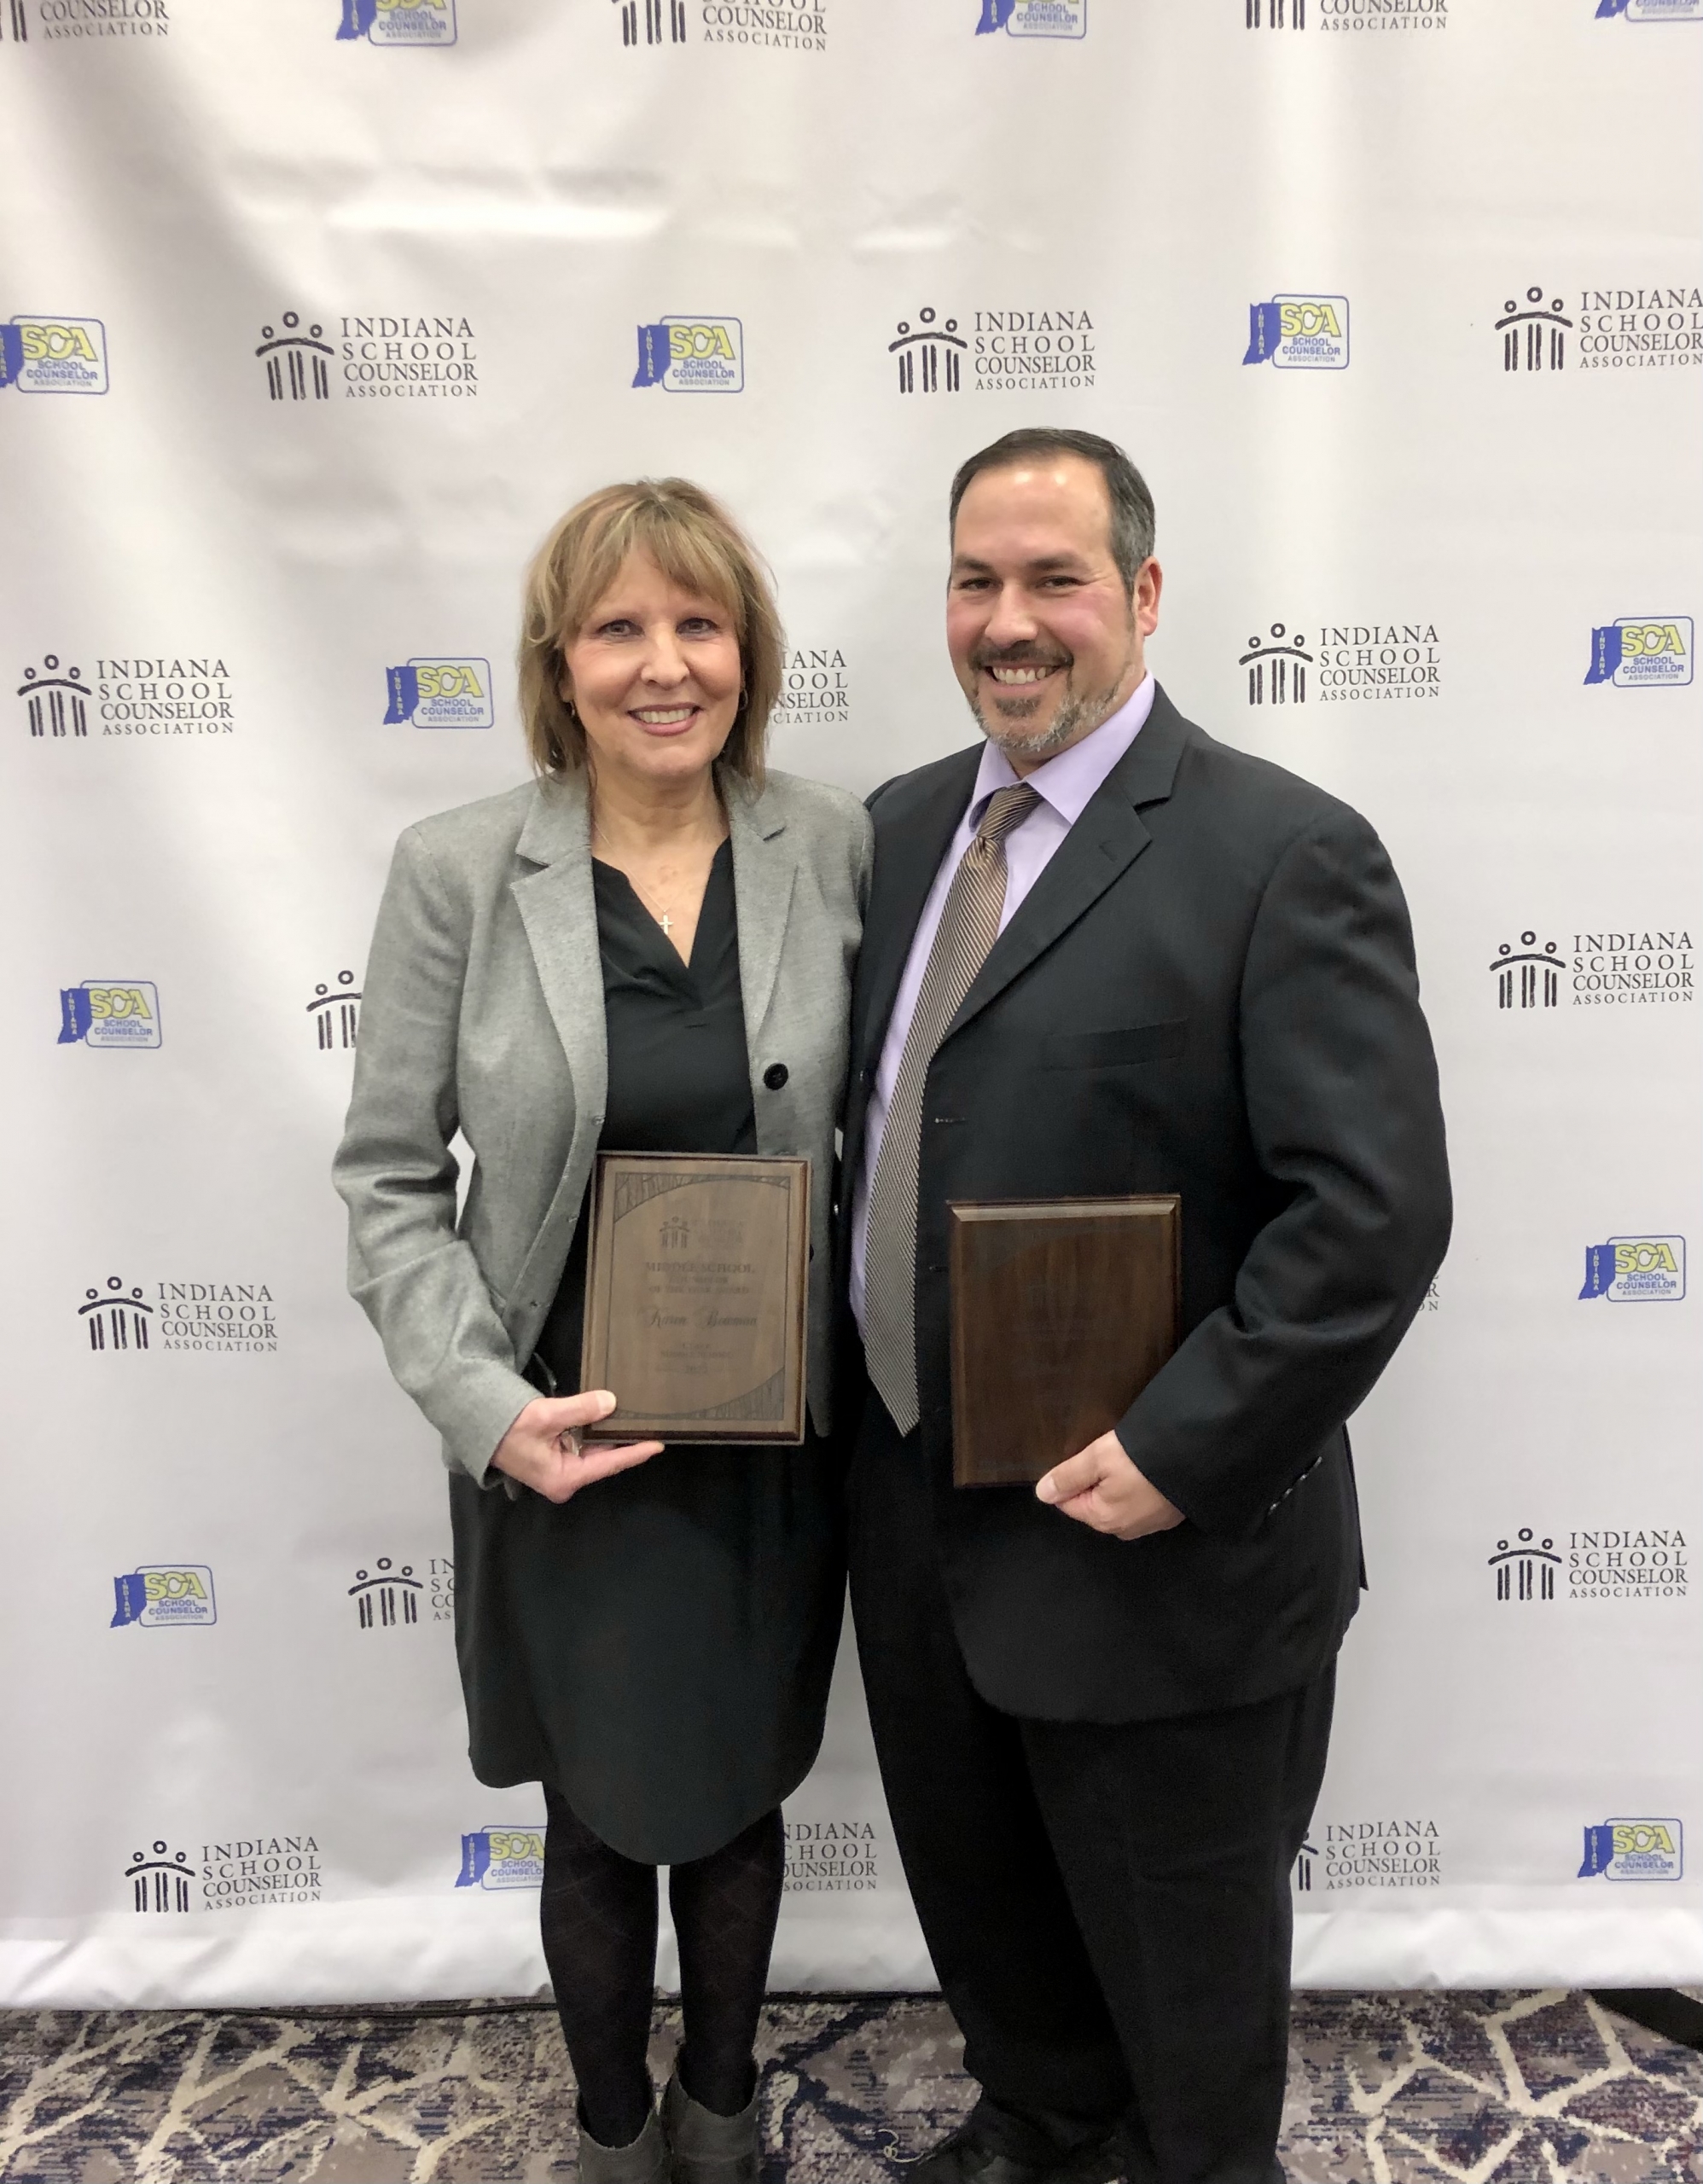 On Friday, November 12th, two Lake Central staff members were honored by the Indiana School Counselor Association. Karen Bowman, counselor at Clark Middle School, was named the Indiana Middle School Counselor of the Year. And Richard Moore, Associate Principal at Lake Central High School, was named the Indiana School Administrator of the Year. Congratulations to both for receiving these much deserved awards for their outstanding service to our students and our school community.